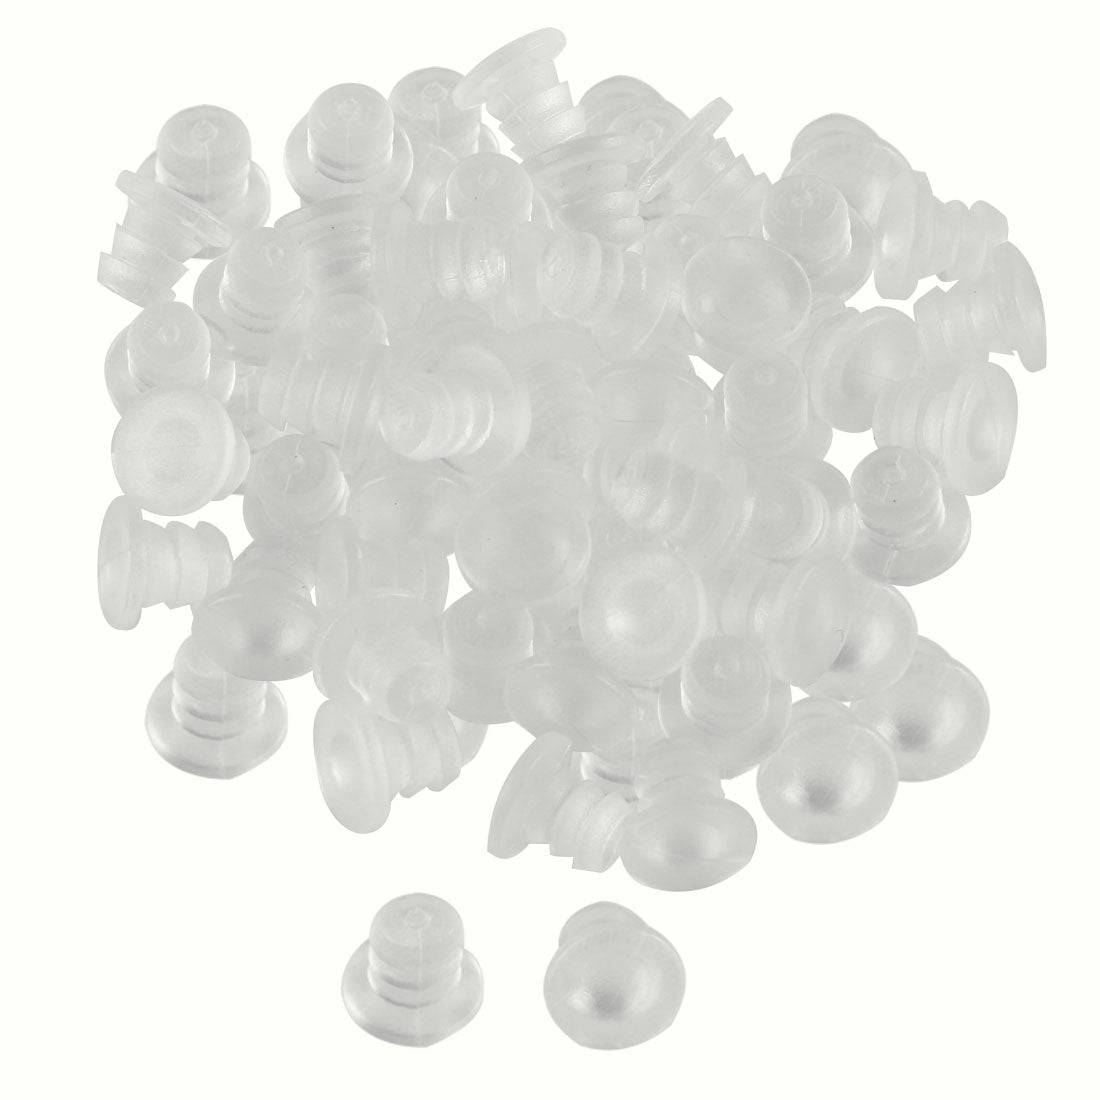 uxcell Uxcell 100pcs 5mm Soft Clear Stem Bumpers Glide, Patio Outdoor Furniture Glass Table Top Anti-collision Embedded